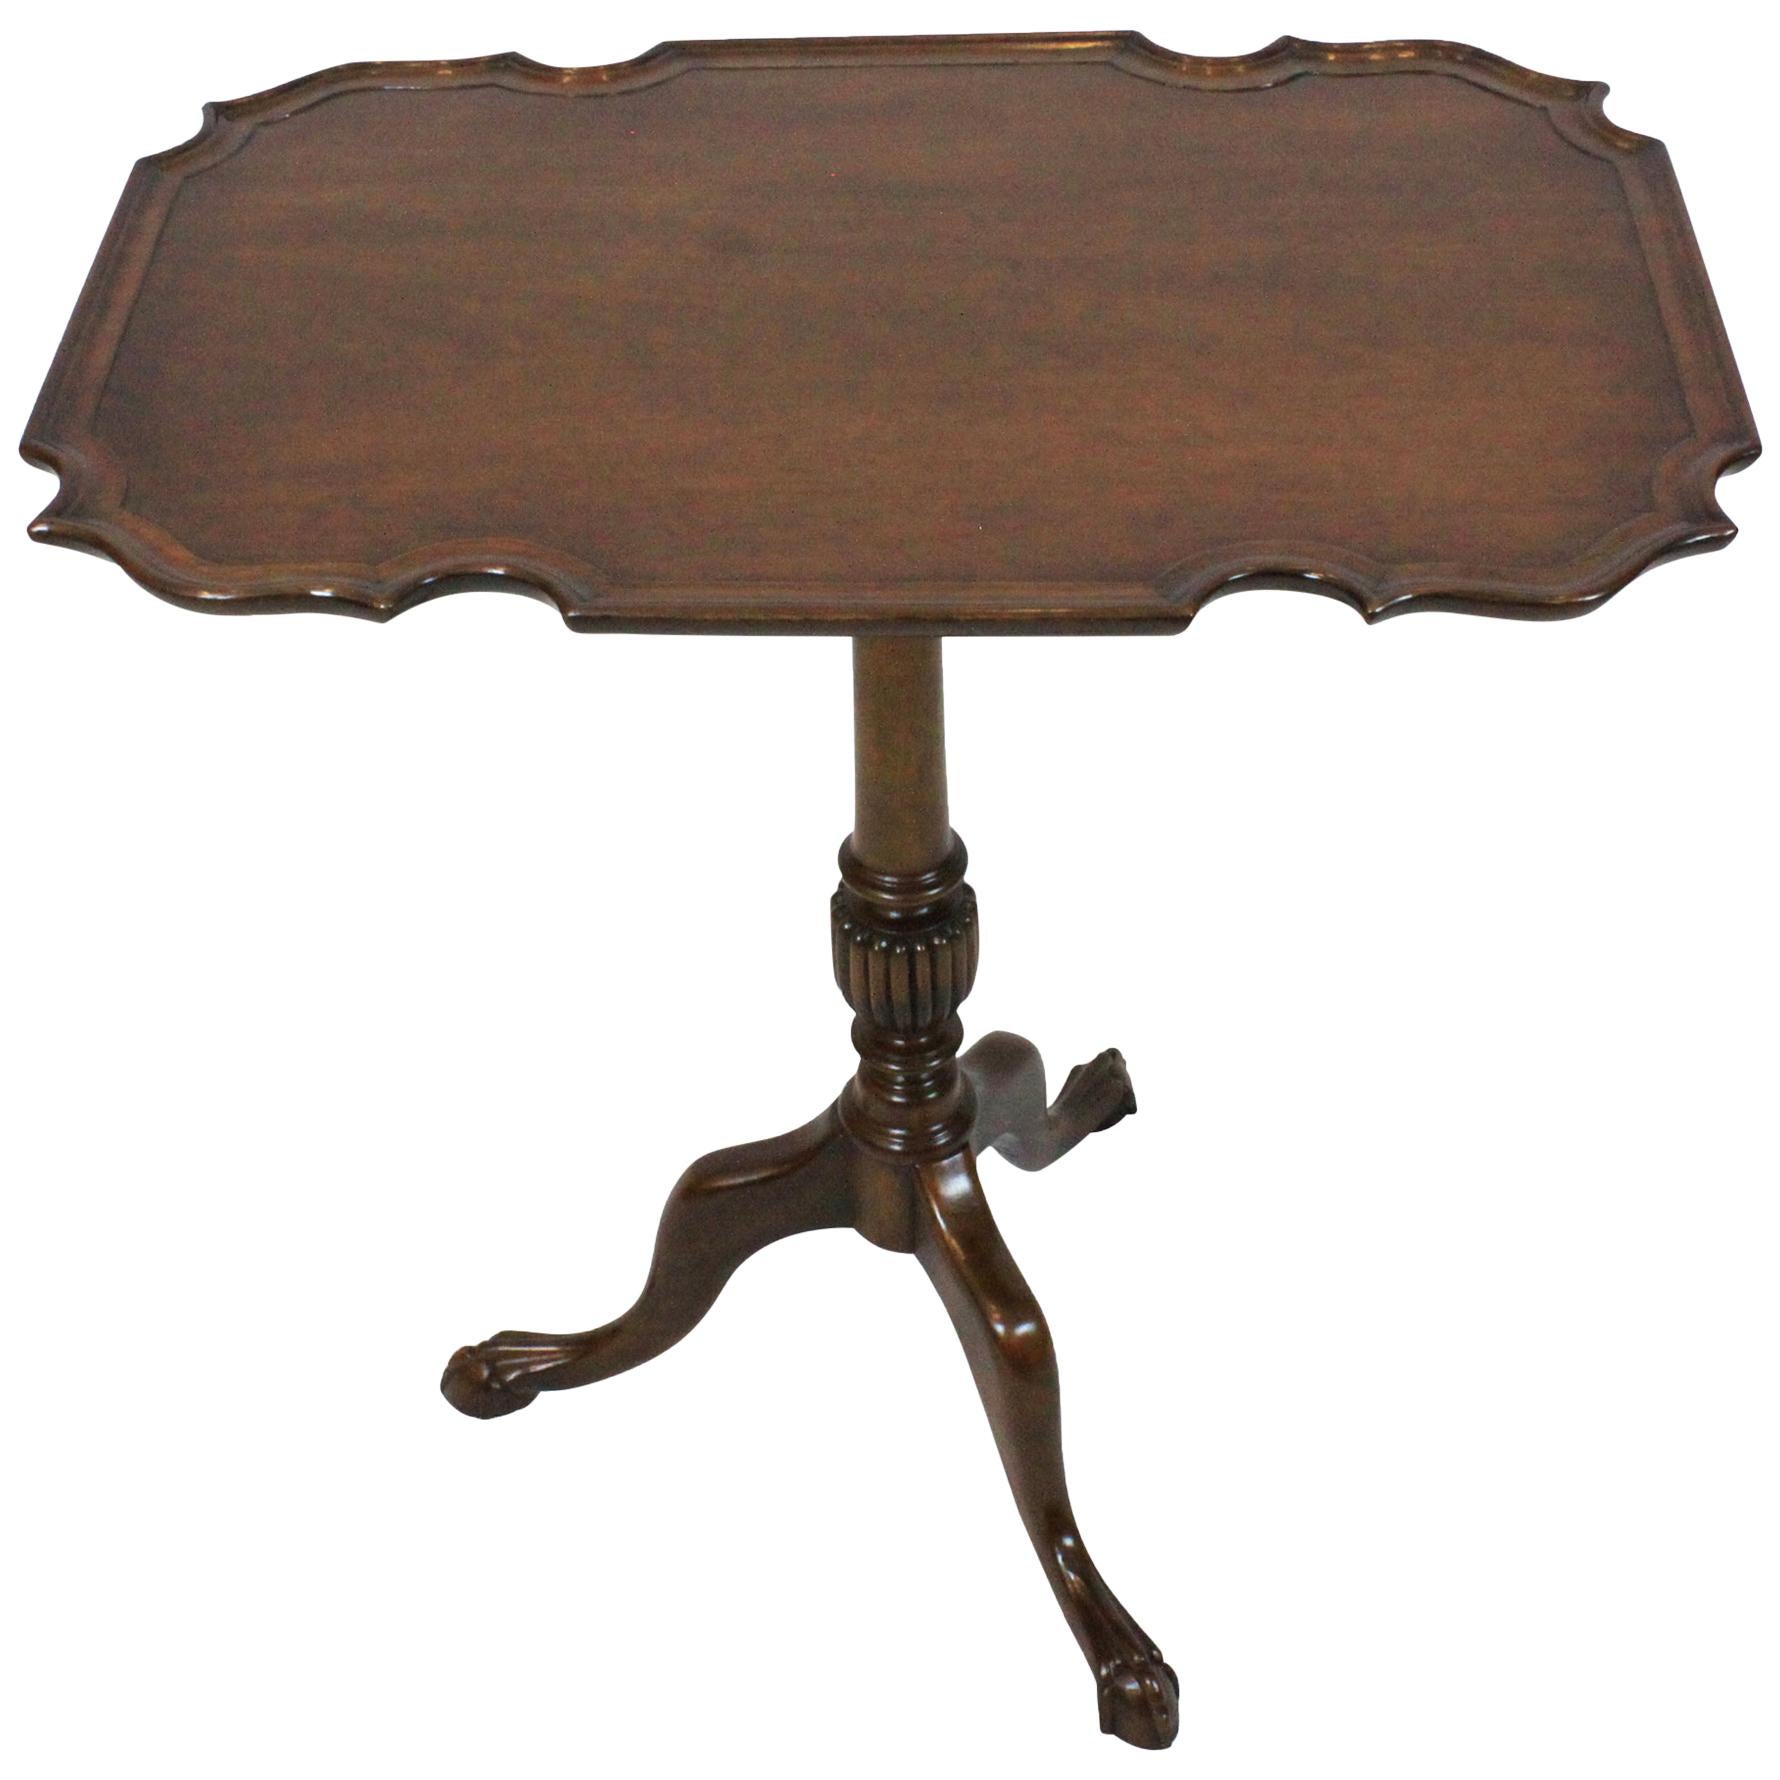 Chippendale Style Tilt-top Table with Pie Crust Top